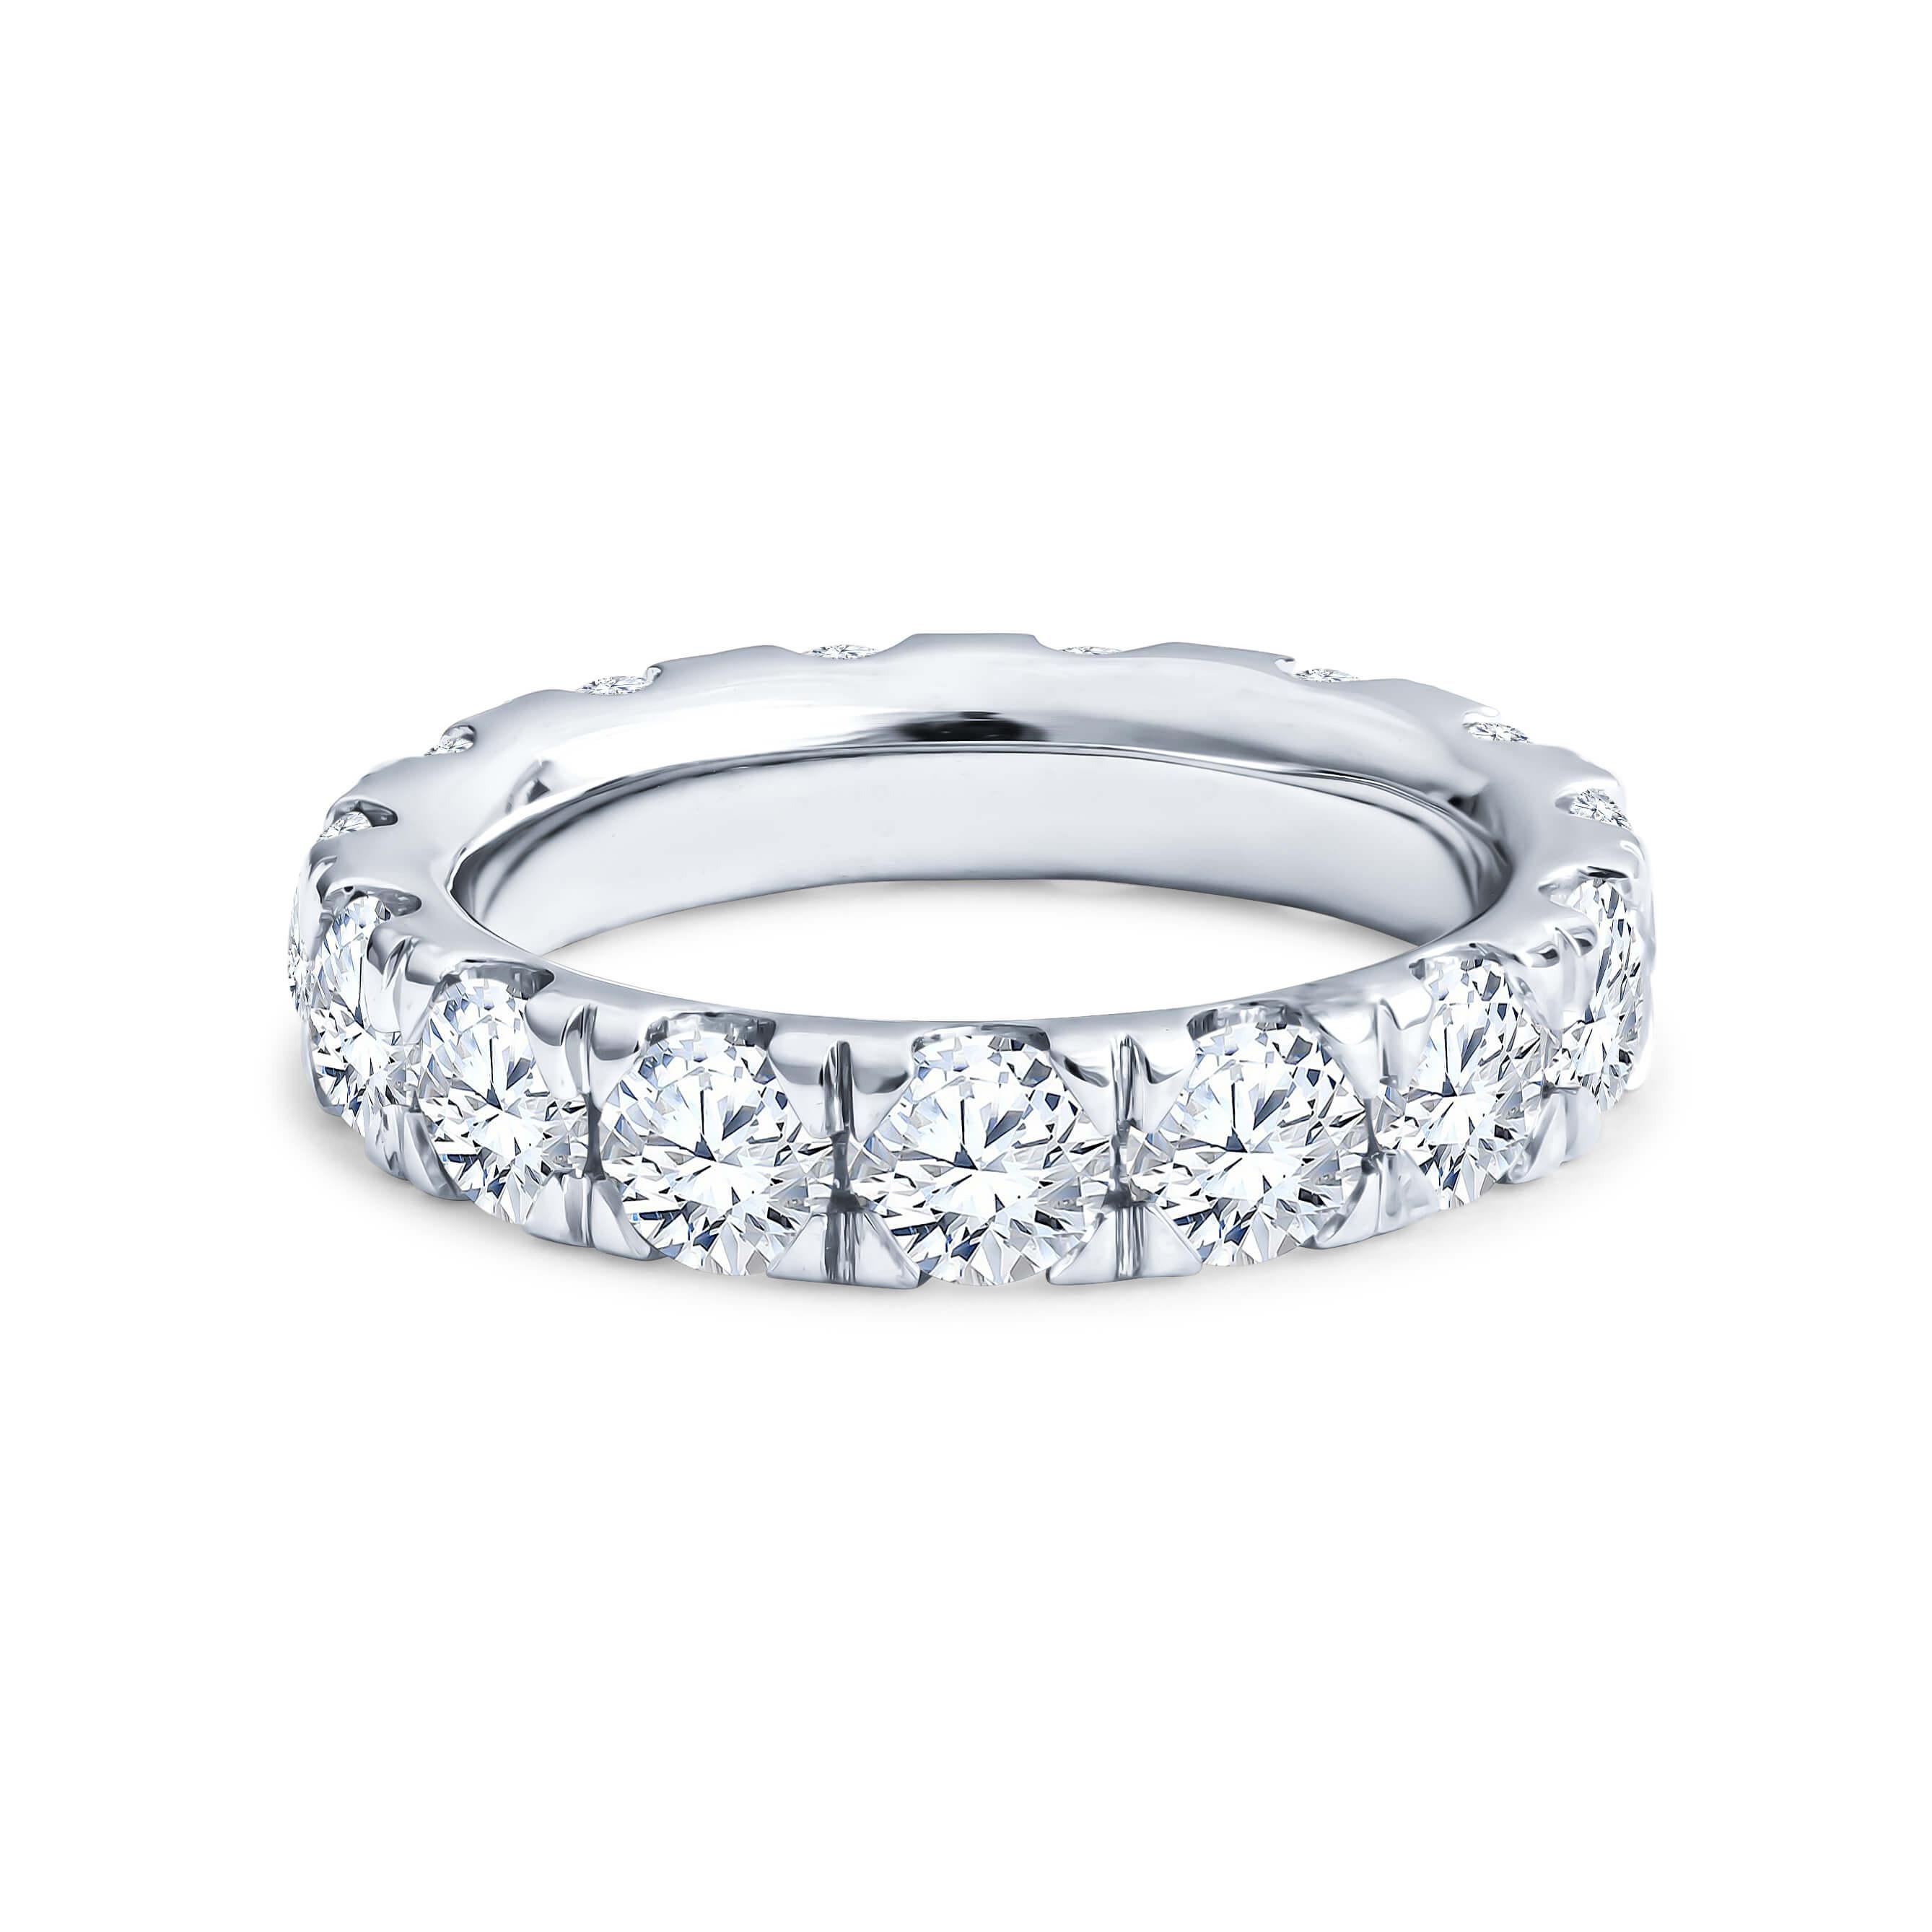 This eternity band features 3.83ctw in round brilliant cut diamonds set in 18kt white gold ring with split prongs. The ring is a size 6, 4.25mm wide